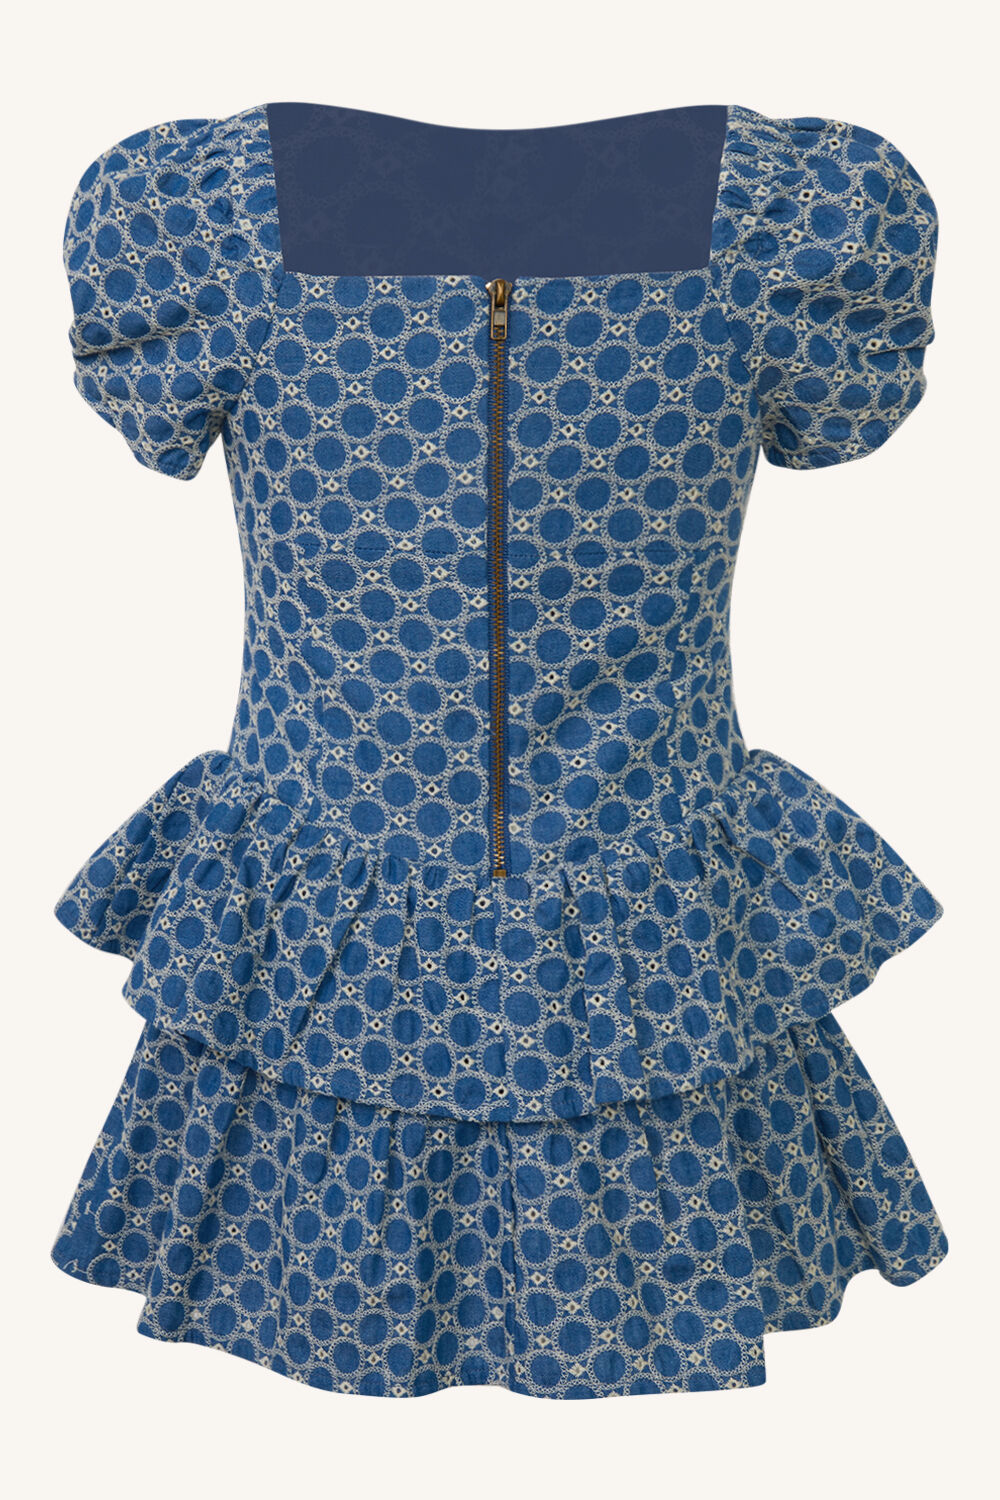 GIRLS BRODERIE CORSET DRESS in colour CHAMBRAY BLUE